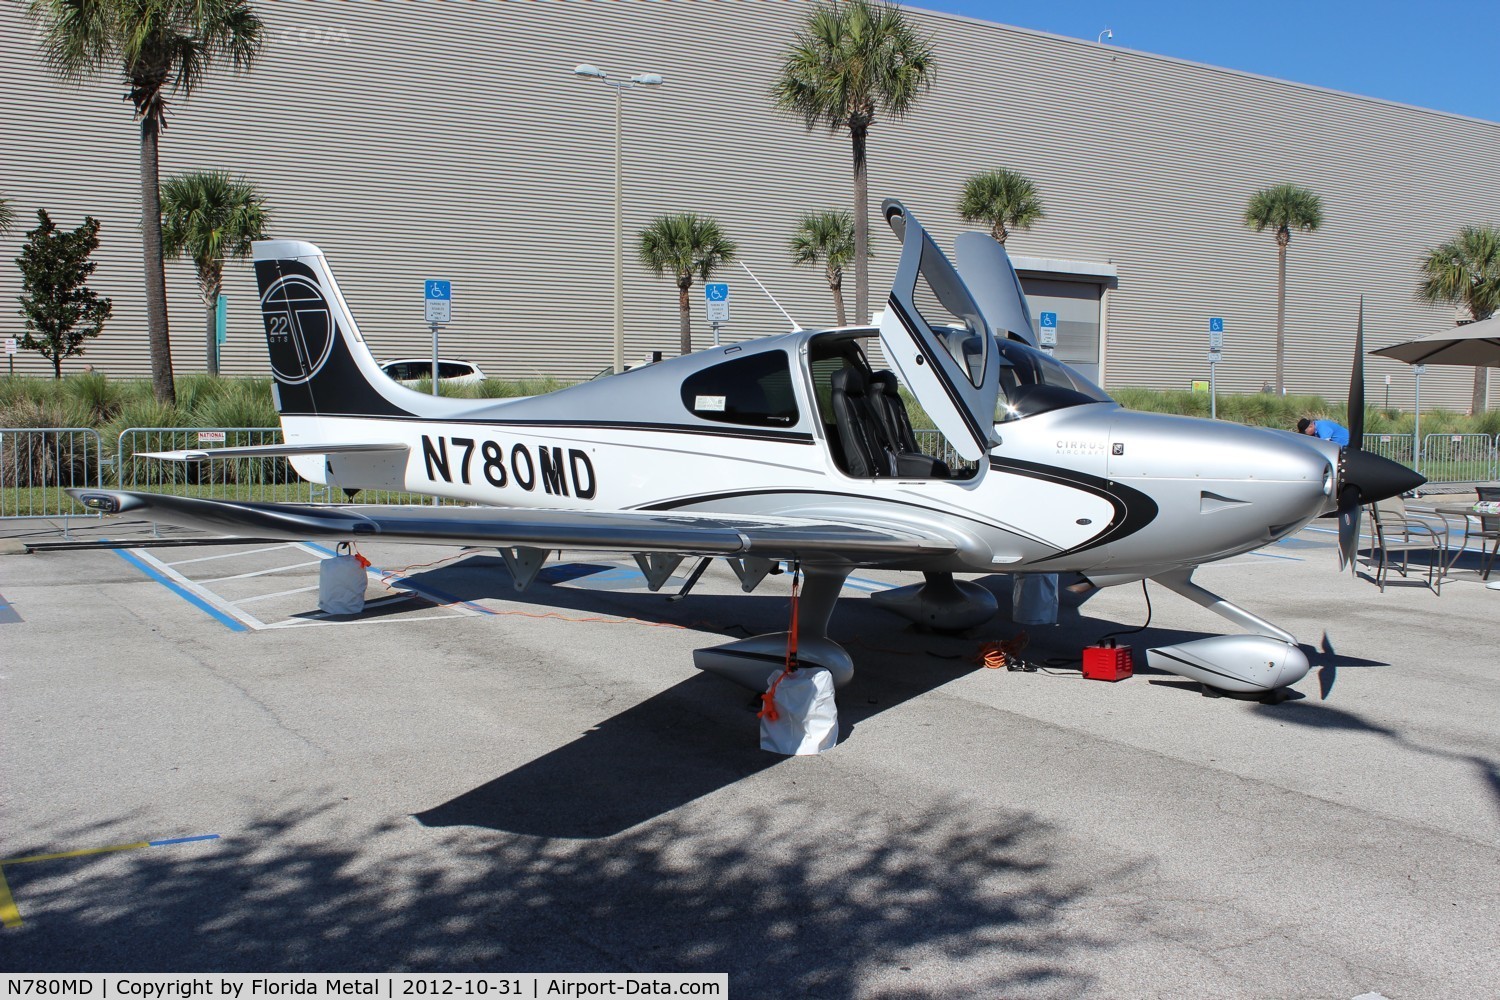 N780MD, 2012 Cirrus SR22T GTS C/N 0340, Cirrus SR-22T at the Orange County Convention Center for NBAA 2012